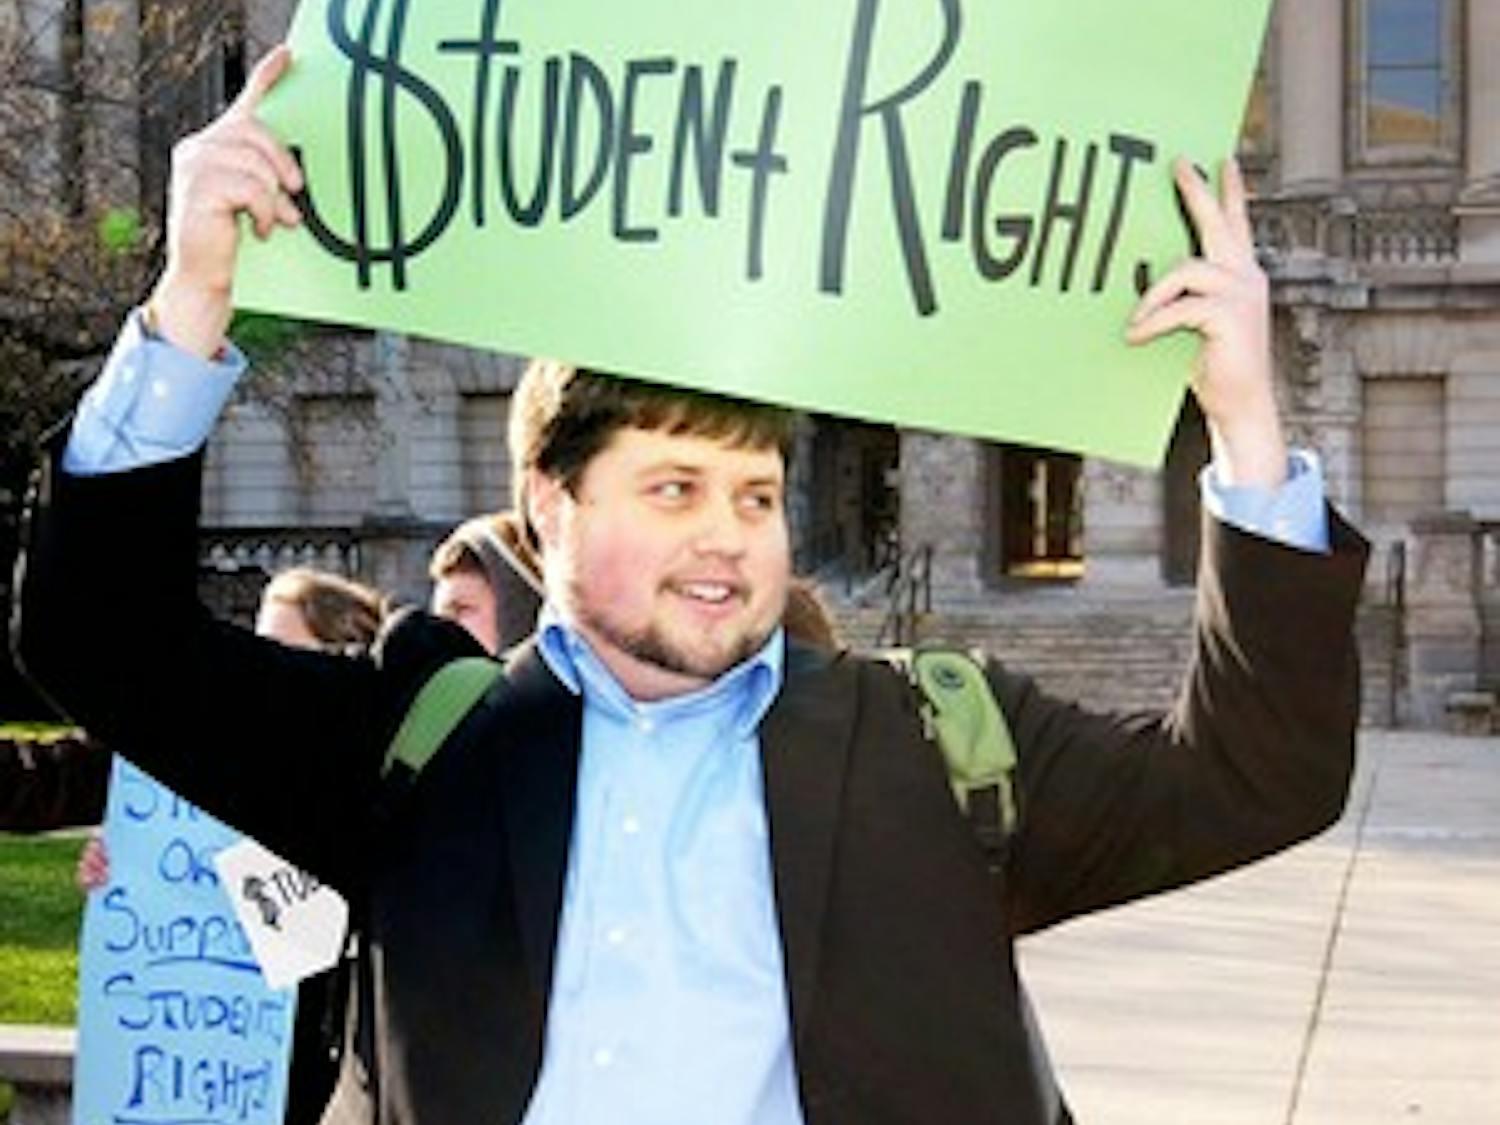 Students rally for rights in seg fee distribution